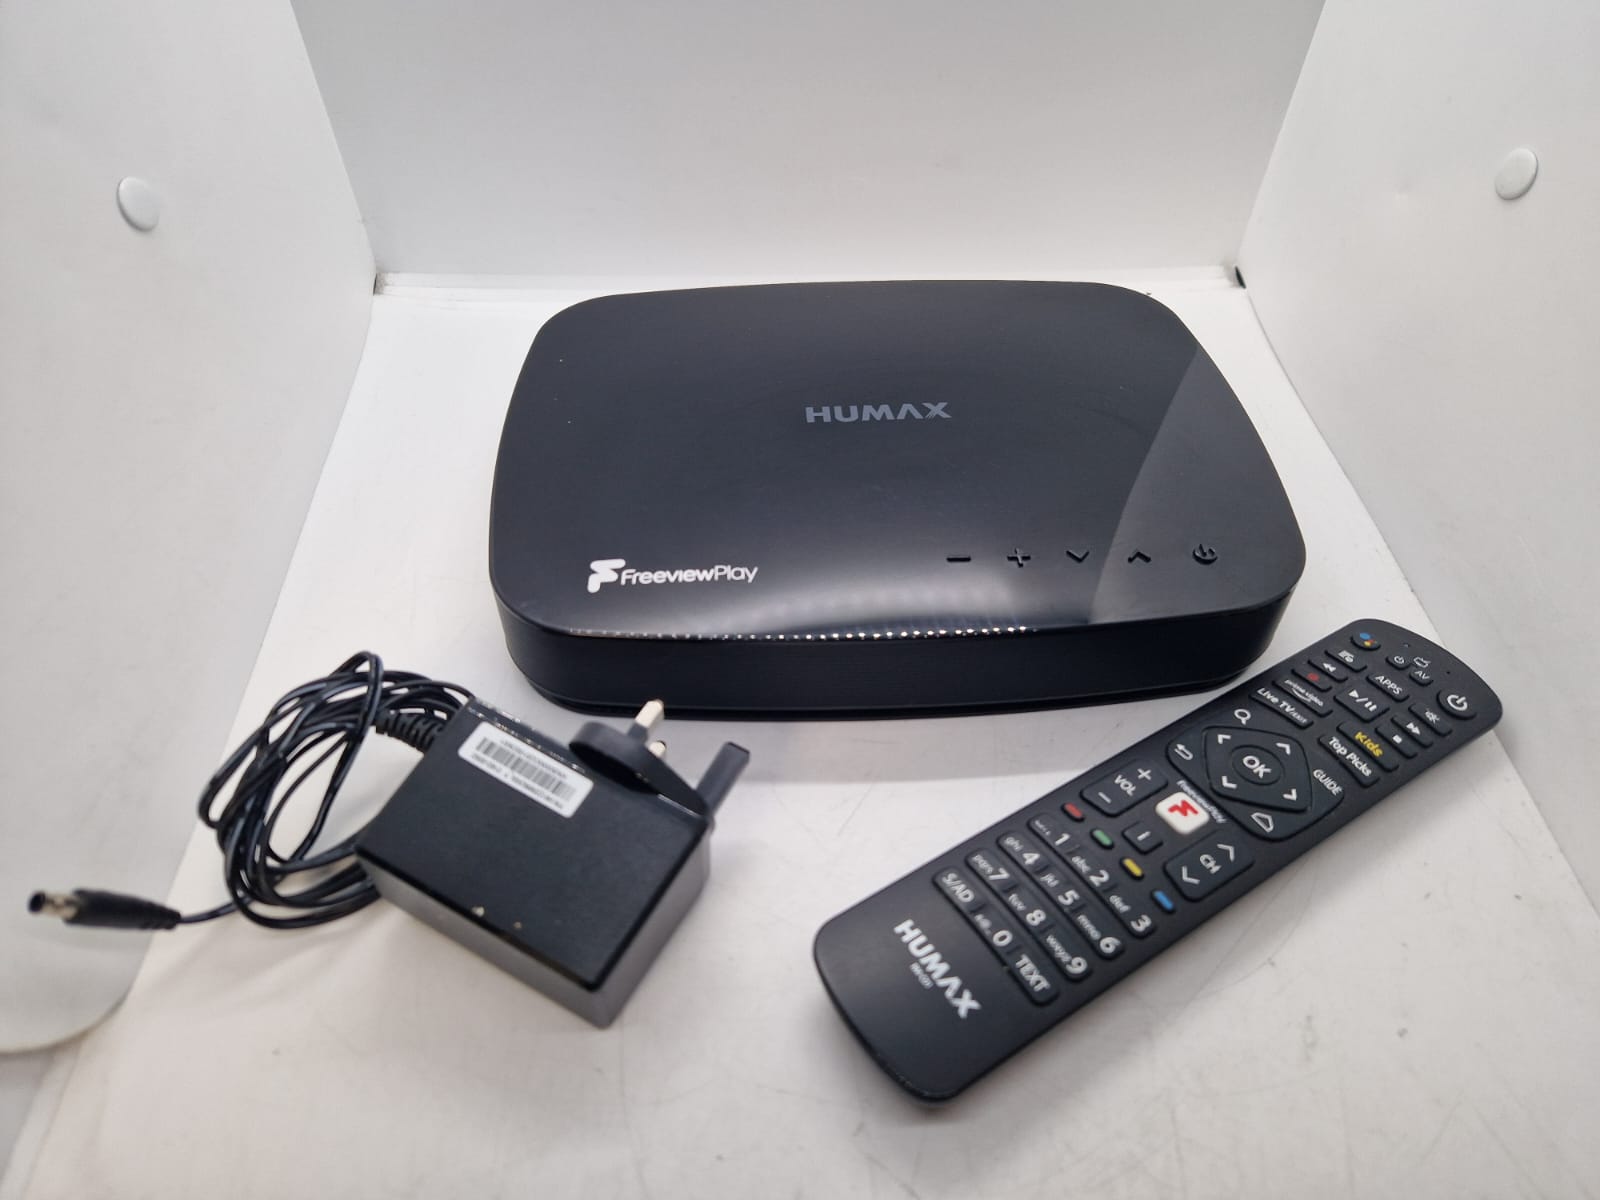 Humax 2TB 4K Ultra HD Smart Android Freeview Play TV Recorder - Black